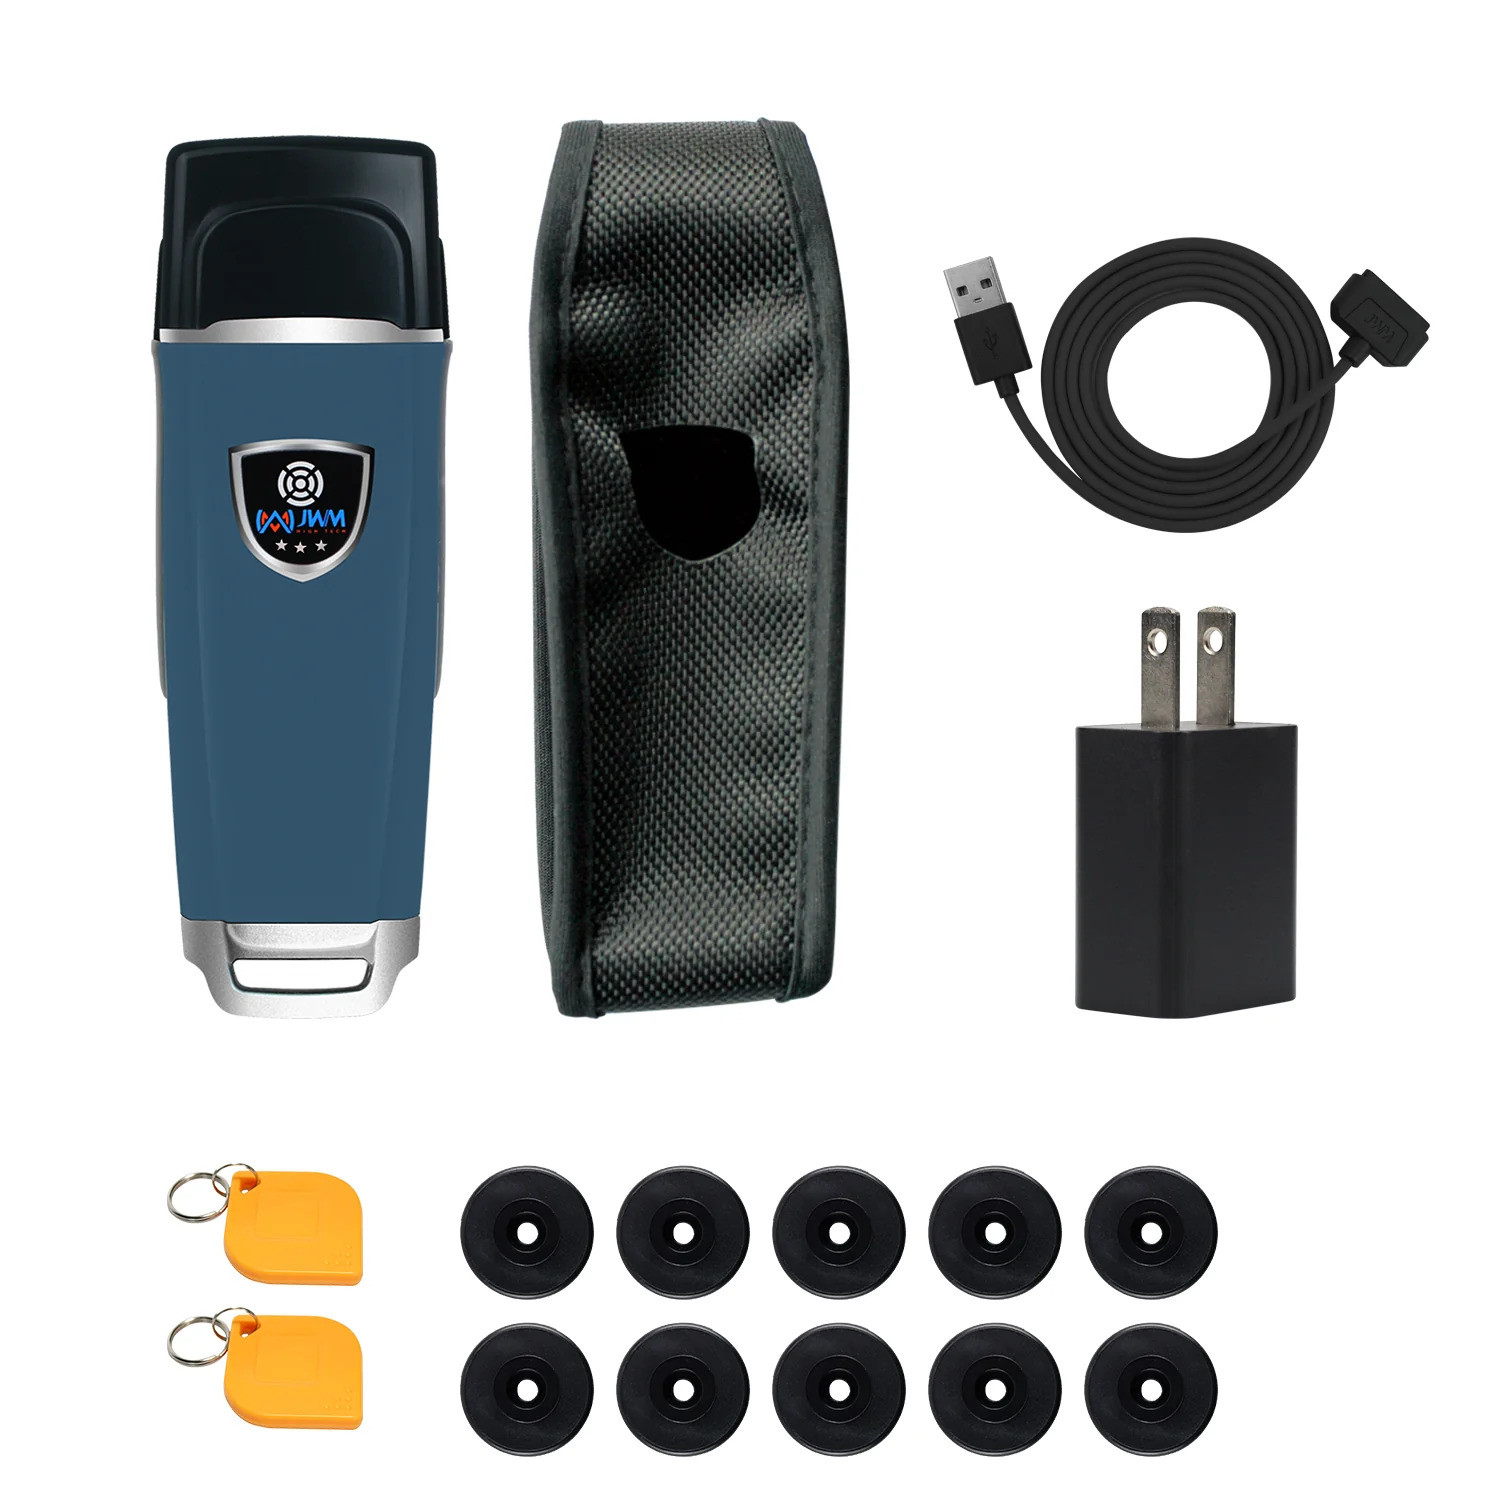 JWM Guard Tour Patrol System with RFID Tags, Security Guard Equipment for Hotels, Hospital, School, Professional Guard Monitoring Attendance System, Free Cloud Software